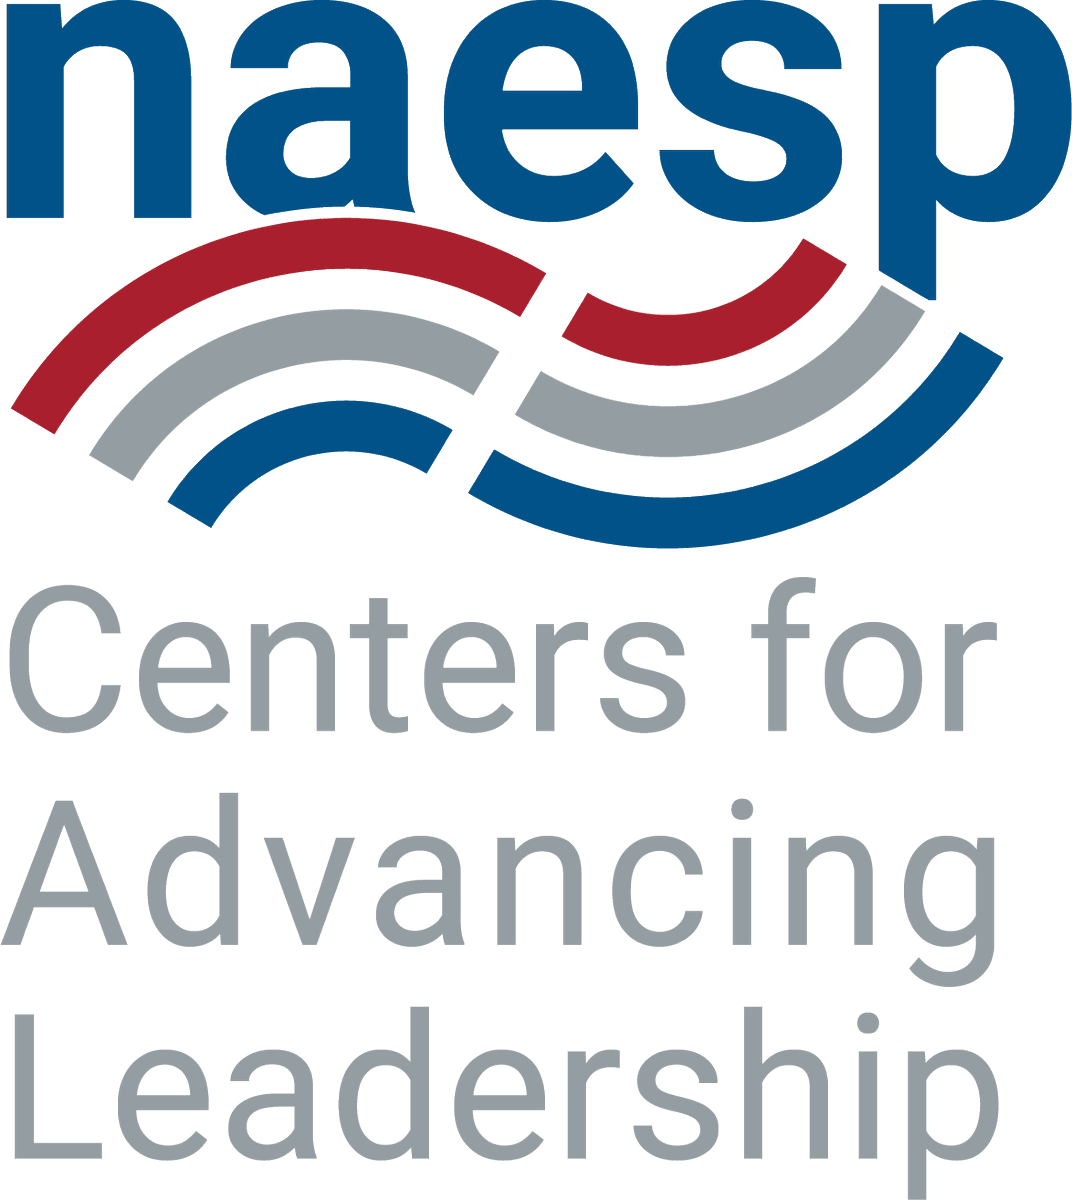 3 Days Left to Apply to Be a Fellow with @NAESP Centers for Advancing Leadership & make a difference in education! As a fellow, you'll facilitate learning, share best practices, promote leadership, and expand your network. Deadline on May 15! Application: docs.google.com/forms/d/e/1FAI…